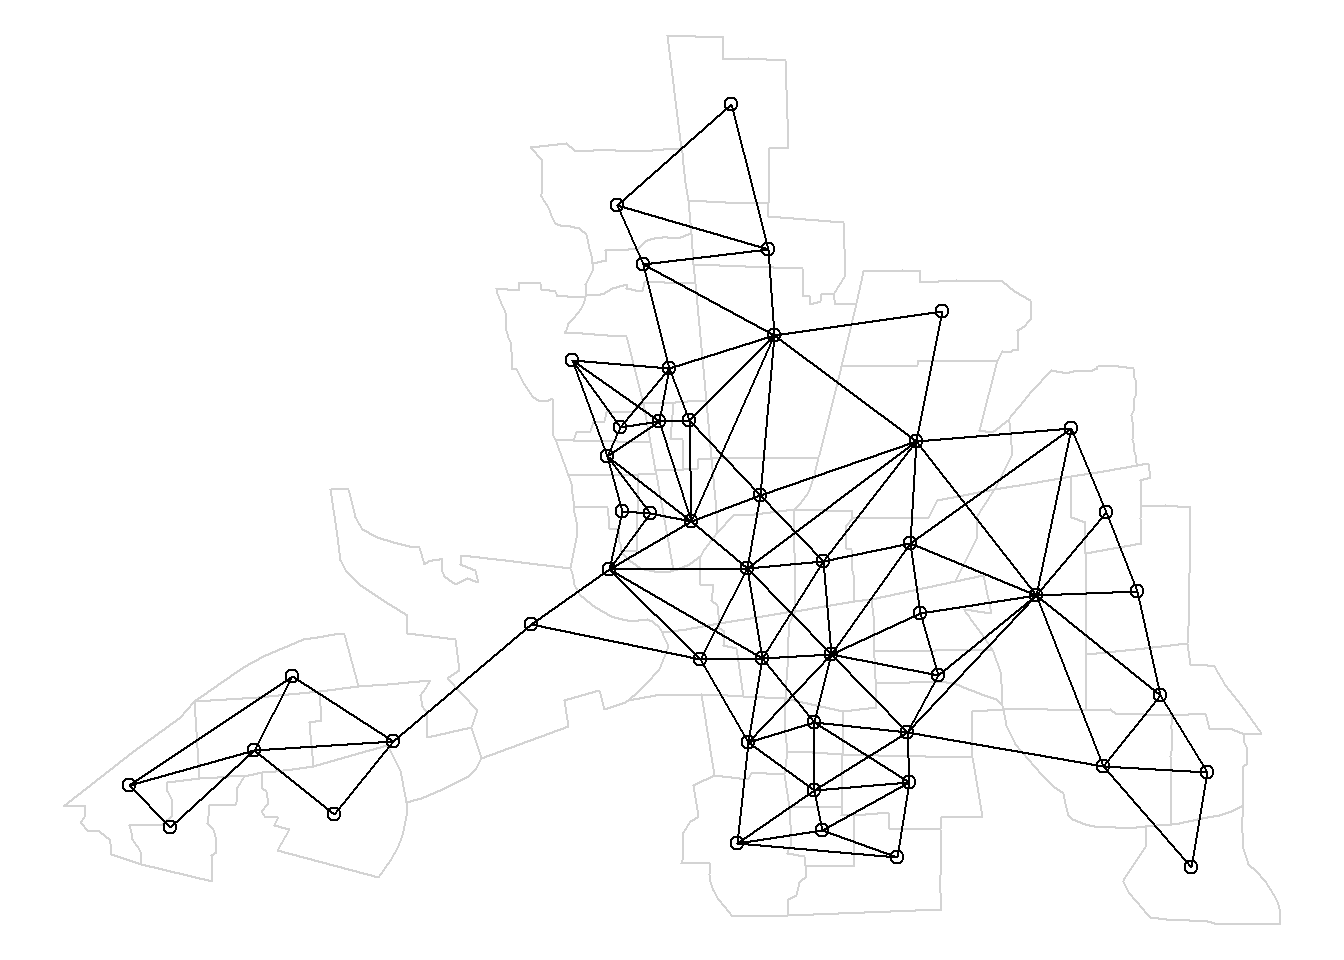 Map of neighbors based on contiguty. Neighbors of first order (left), second order (middle), and first order until second order (right).